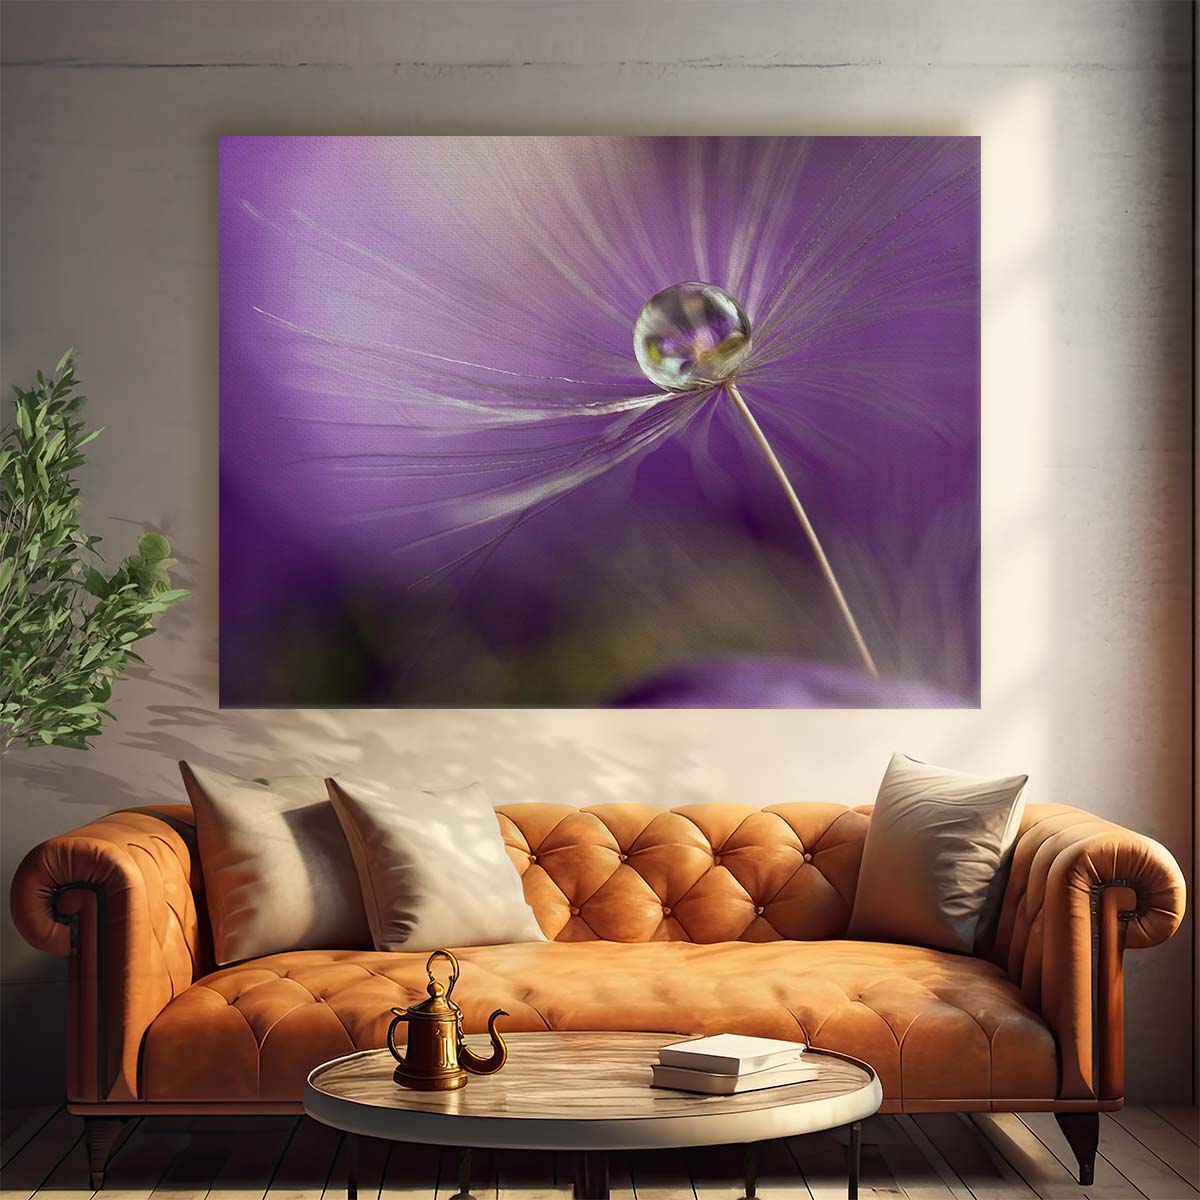 Delicate Purple Feather & Water Drop Macro Wall Art by Luxuriance Designs. Made in USA.